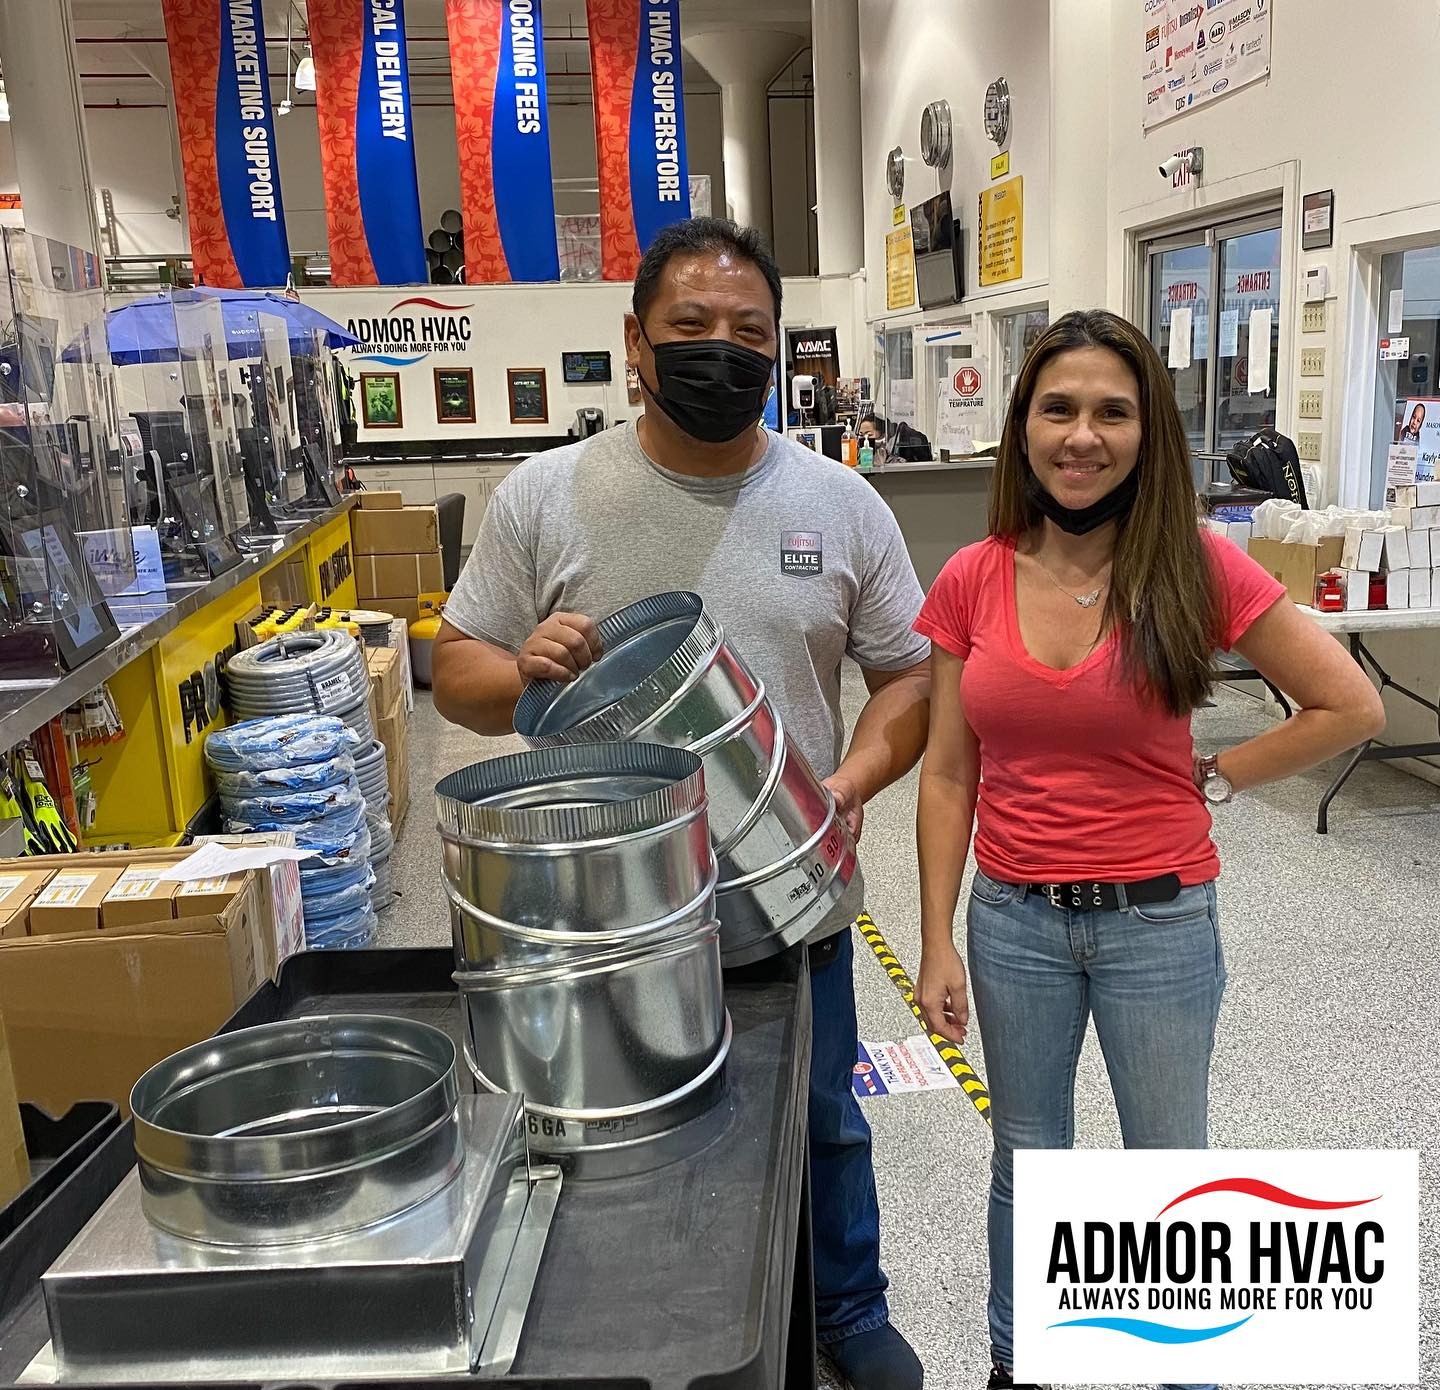 Sherman from Air Masters is shopping with Shawnie and getting EVERYTHING he needs for the job in ONE STOP.  Save time and money shopping with Shawnie and all of our HVAC professionals who Will Always Do More for You!  Shop online at www.admorhvac.com
#oahuhvac #mauihvac #kauaihvac #hawaiihvac #hawaiihvaccontractor #hawaiihvacsuperstore #hvac #plumbing #electrician #hvacowner #hvacpro #hvactechnician #hvacdesign #hvacsupplies #hvacservice #hvacrepair #hvacinstall #hvactools #hvaccontractor #hvacmaintenance #hvacr #hvacinstallation #airconditioning #airconditioninginstallation #airconditioningrepair #airconditioningcontractor #facilitymanagement #propertymanagement #hotelmaintenance #hawaiihotel